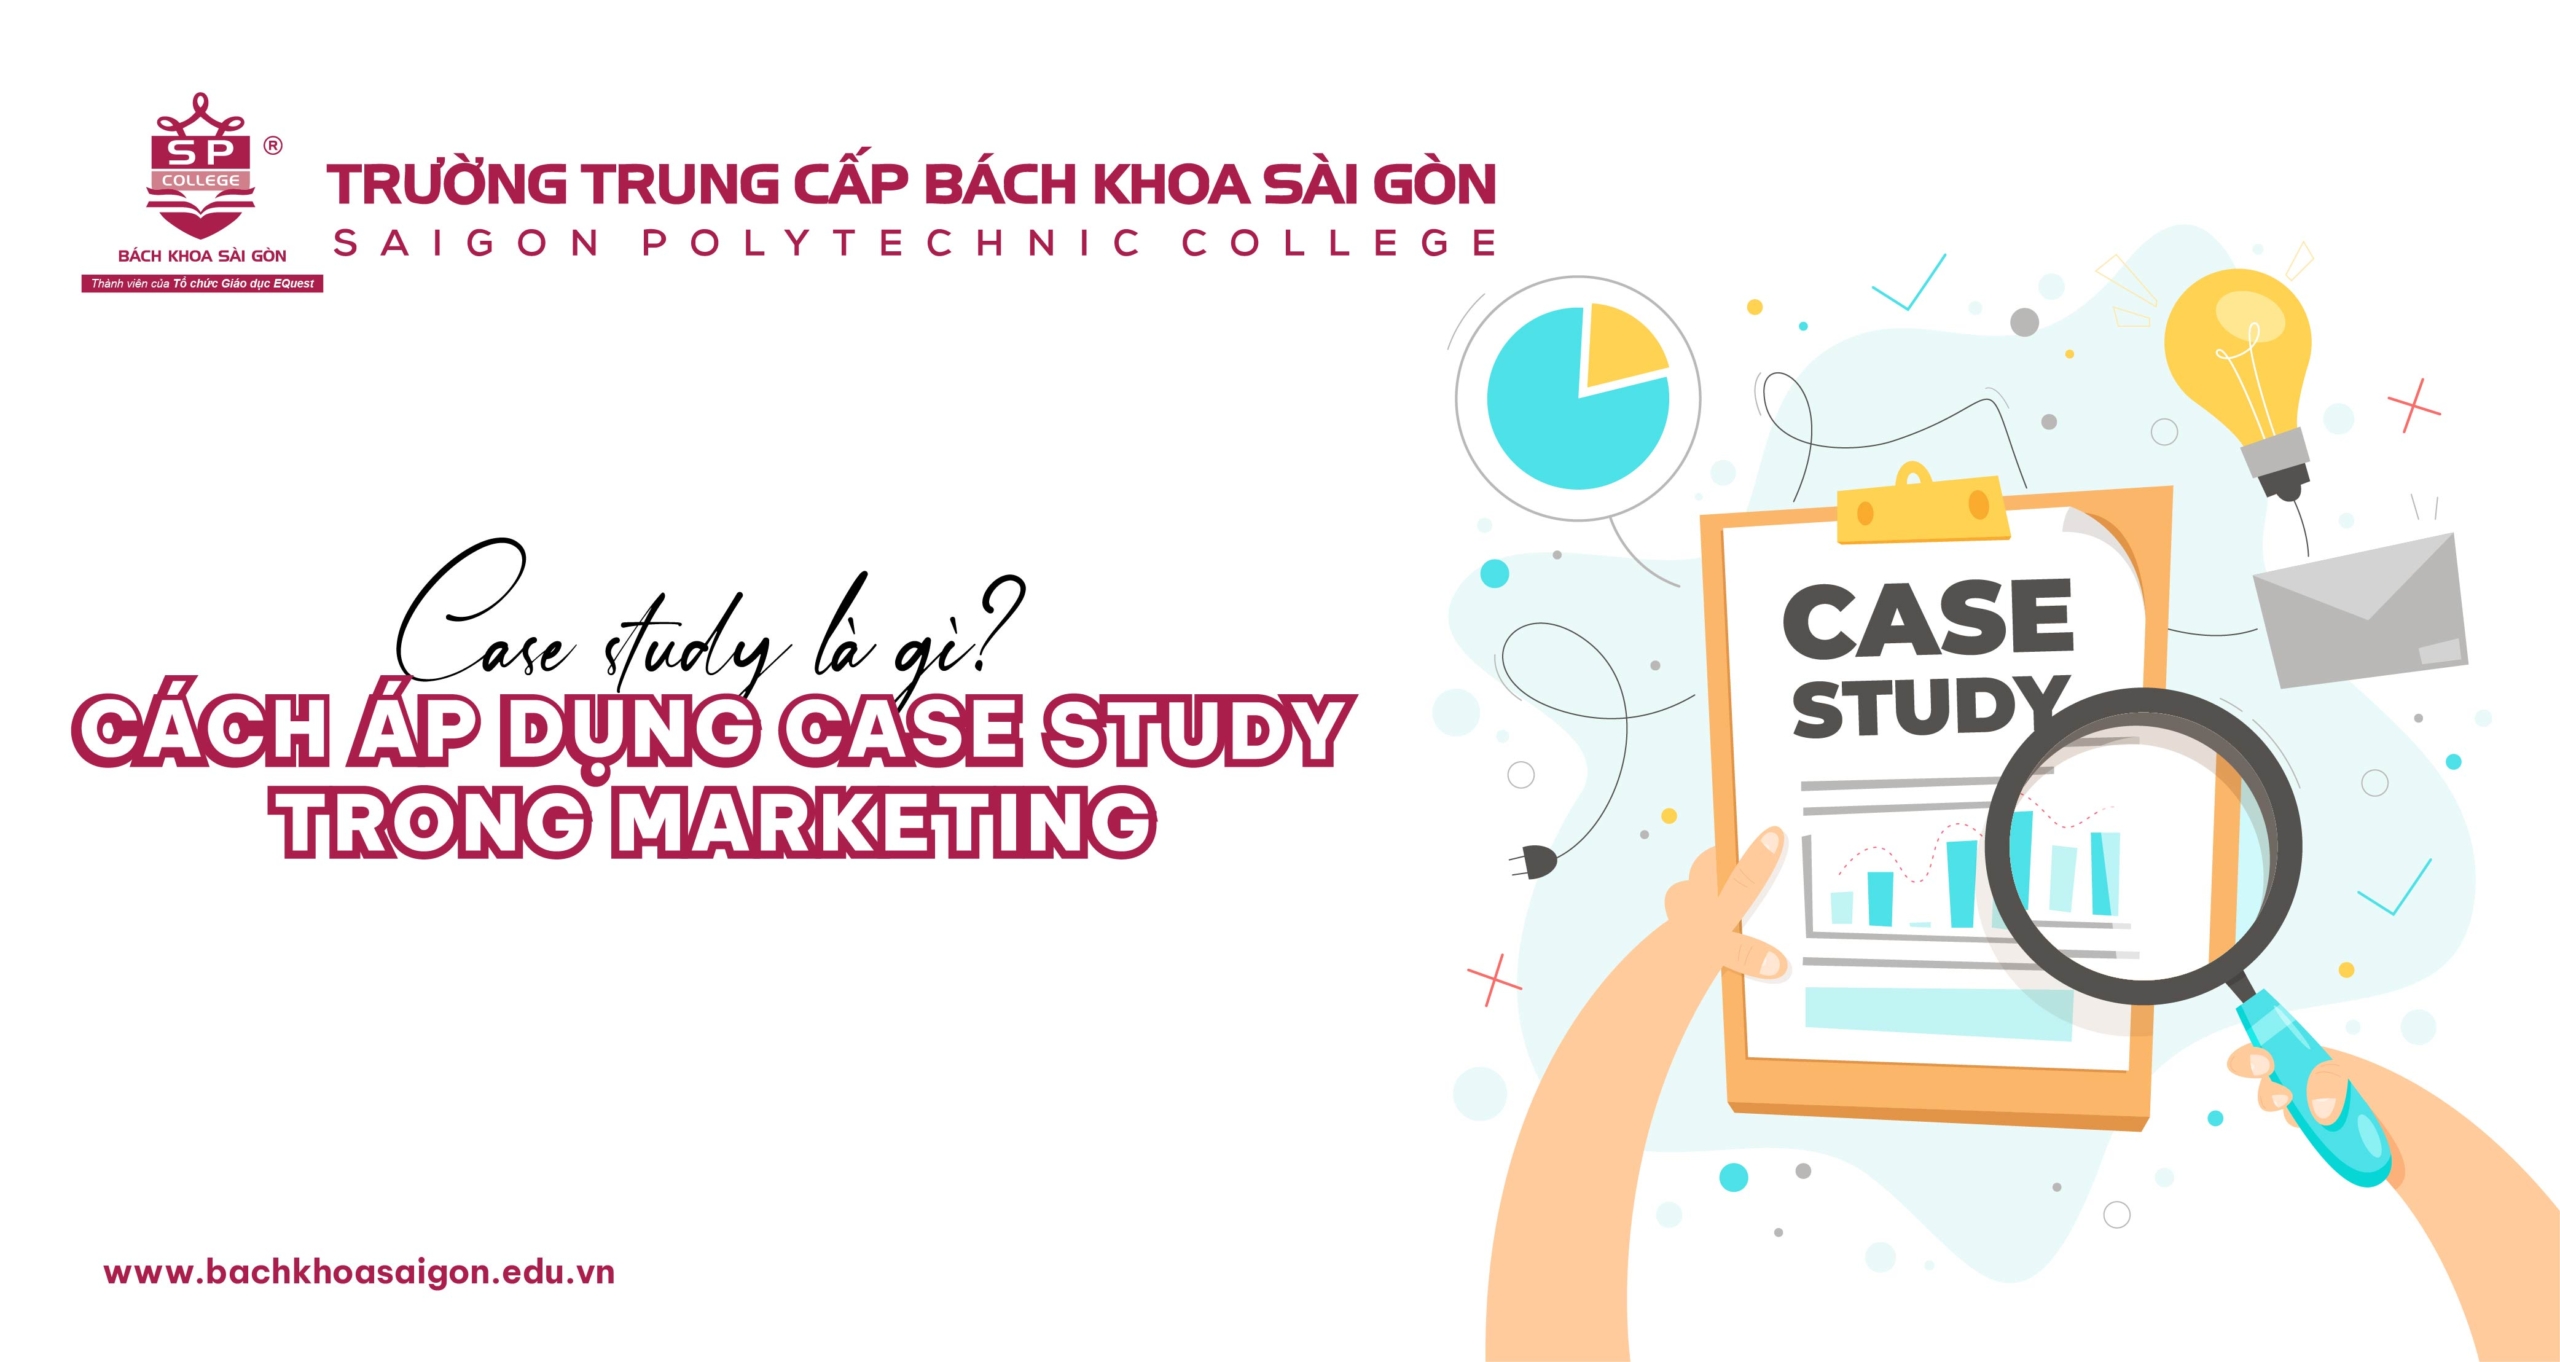 case study la gi cach ap dung case study trong marketing scaled